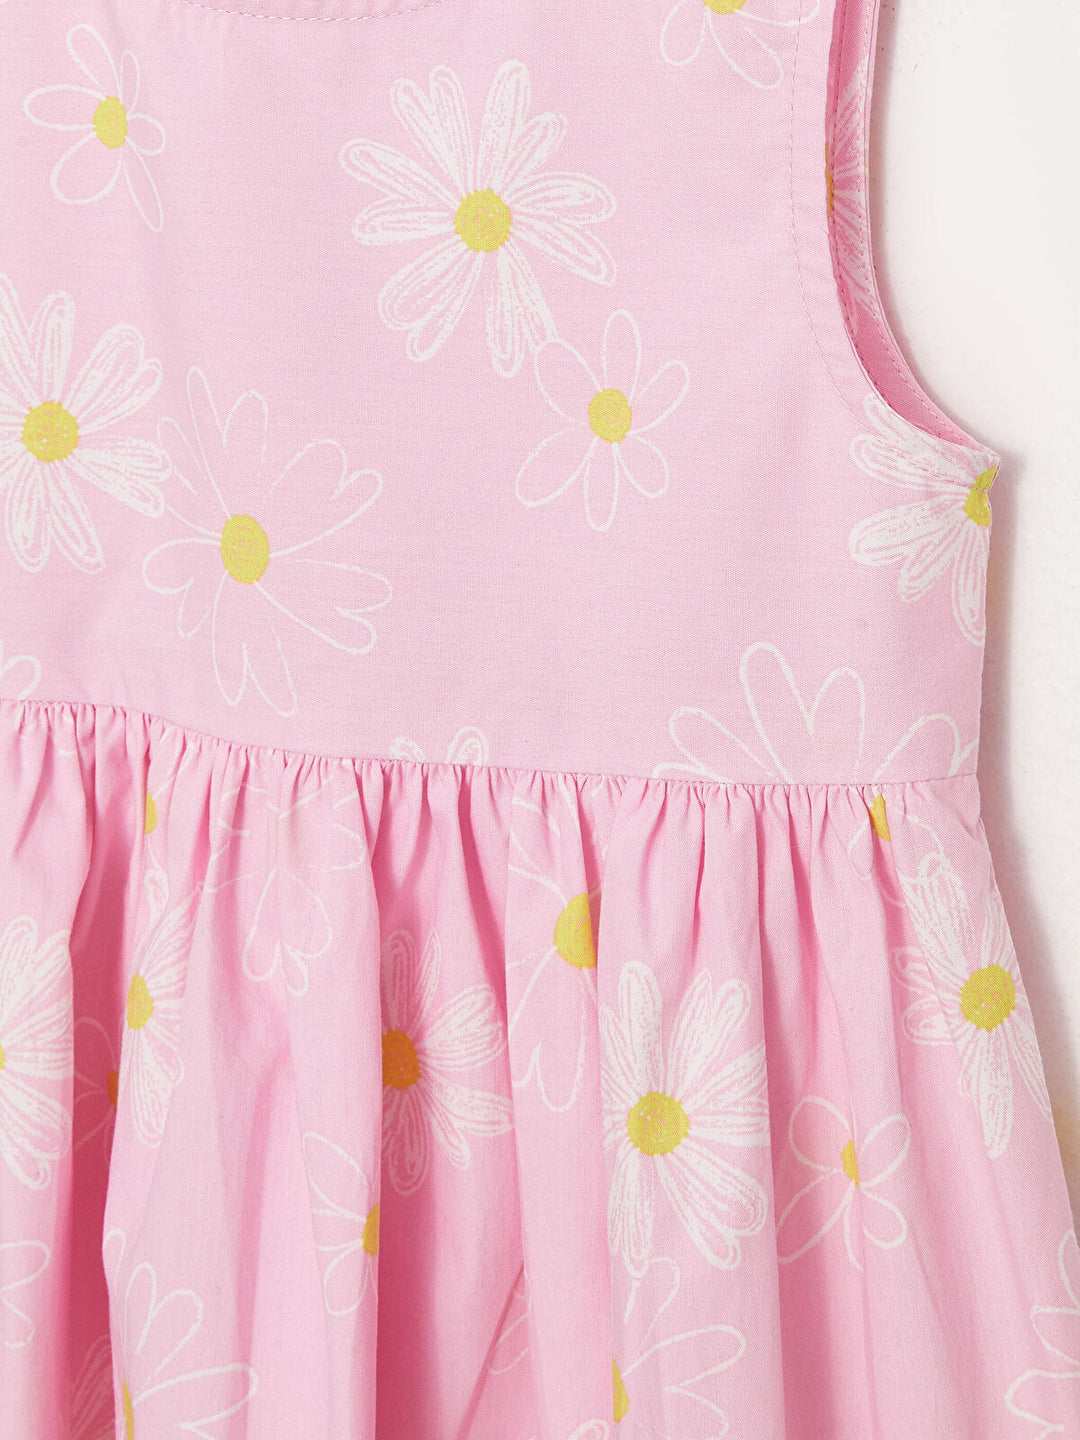 Crew Neck Patterned Baby Girl Dress